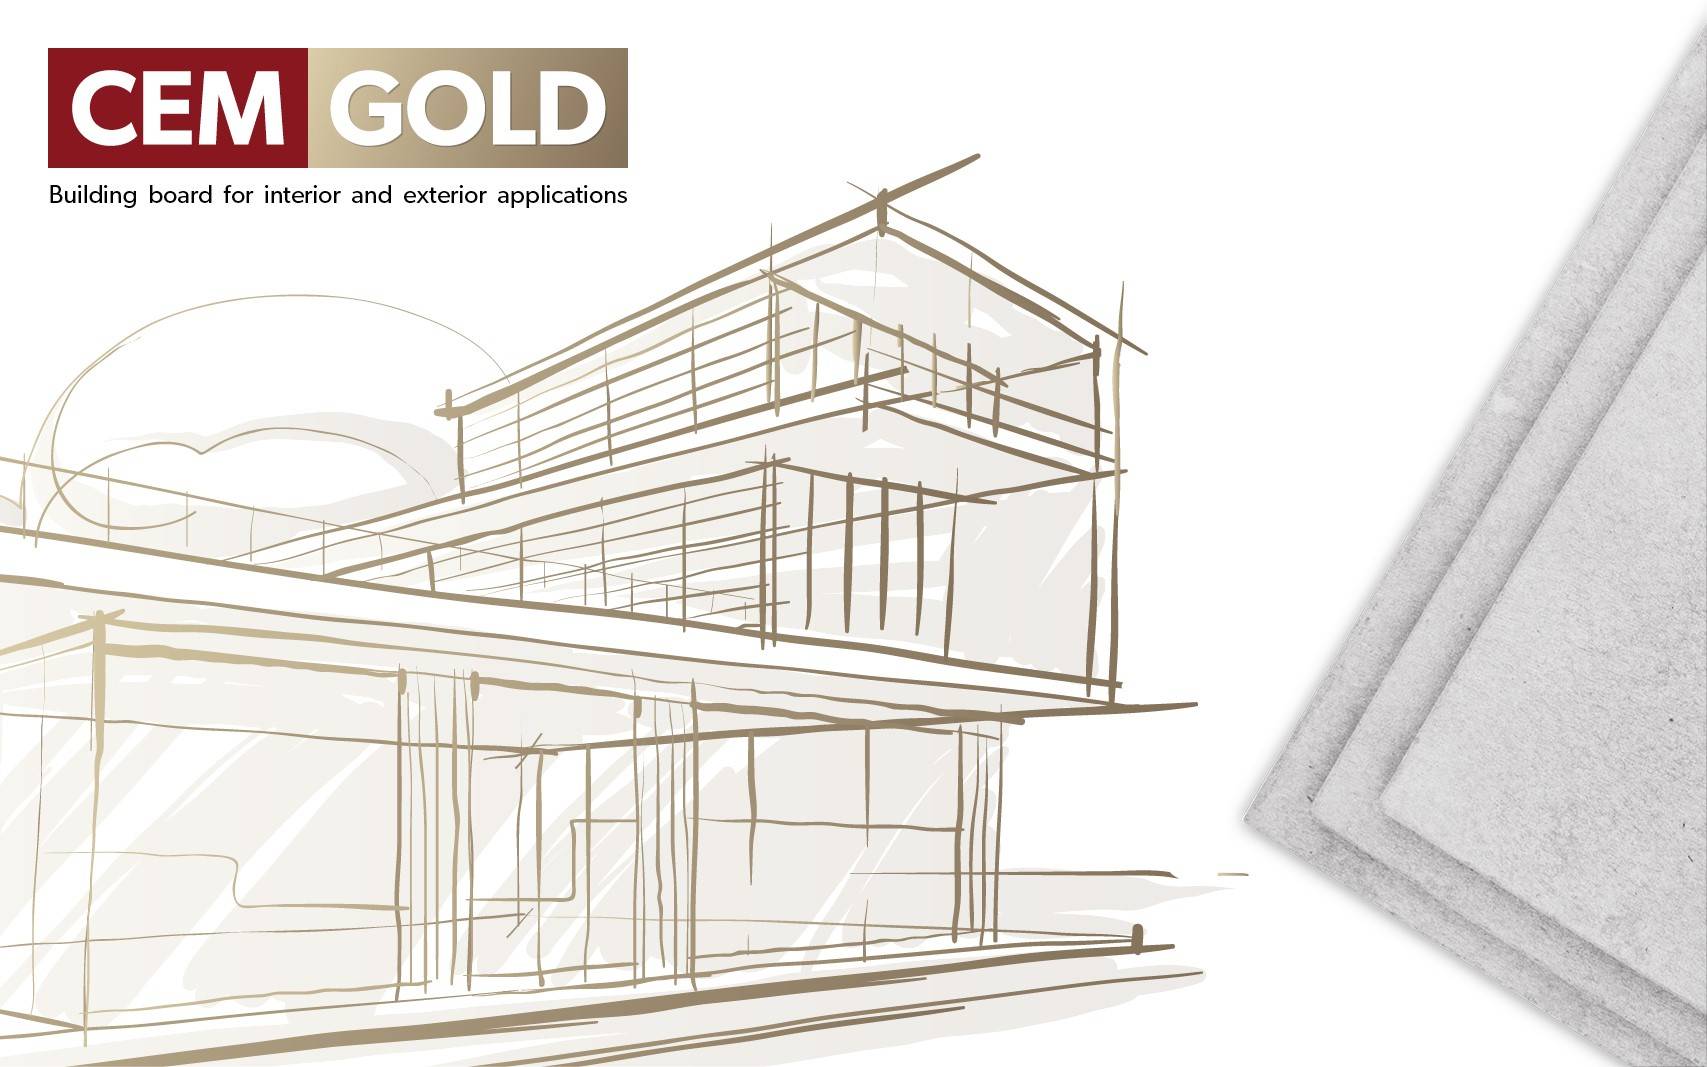 Cemgold Building Board